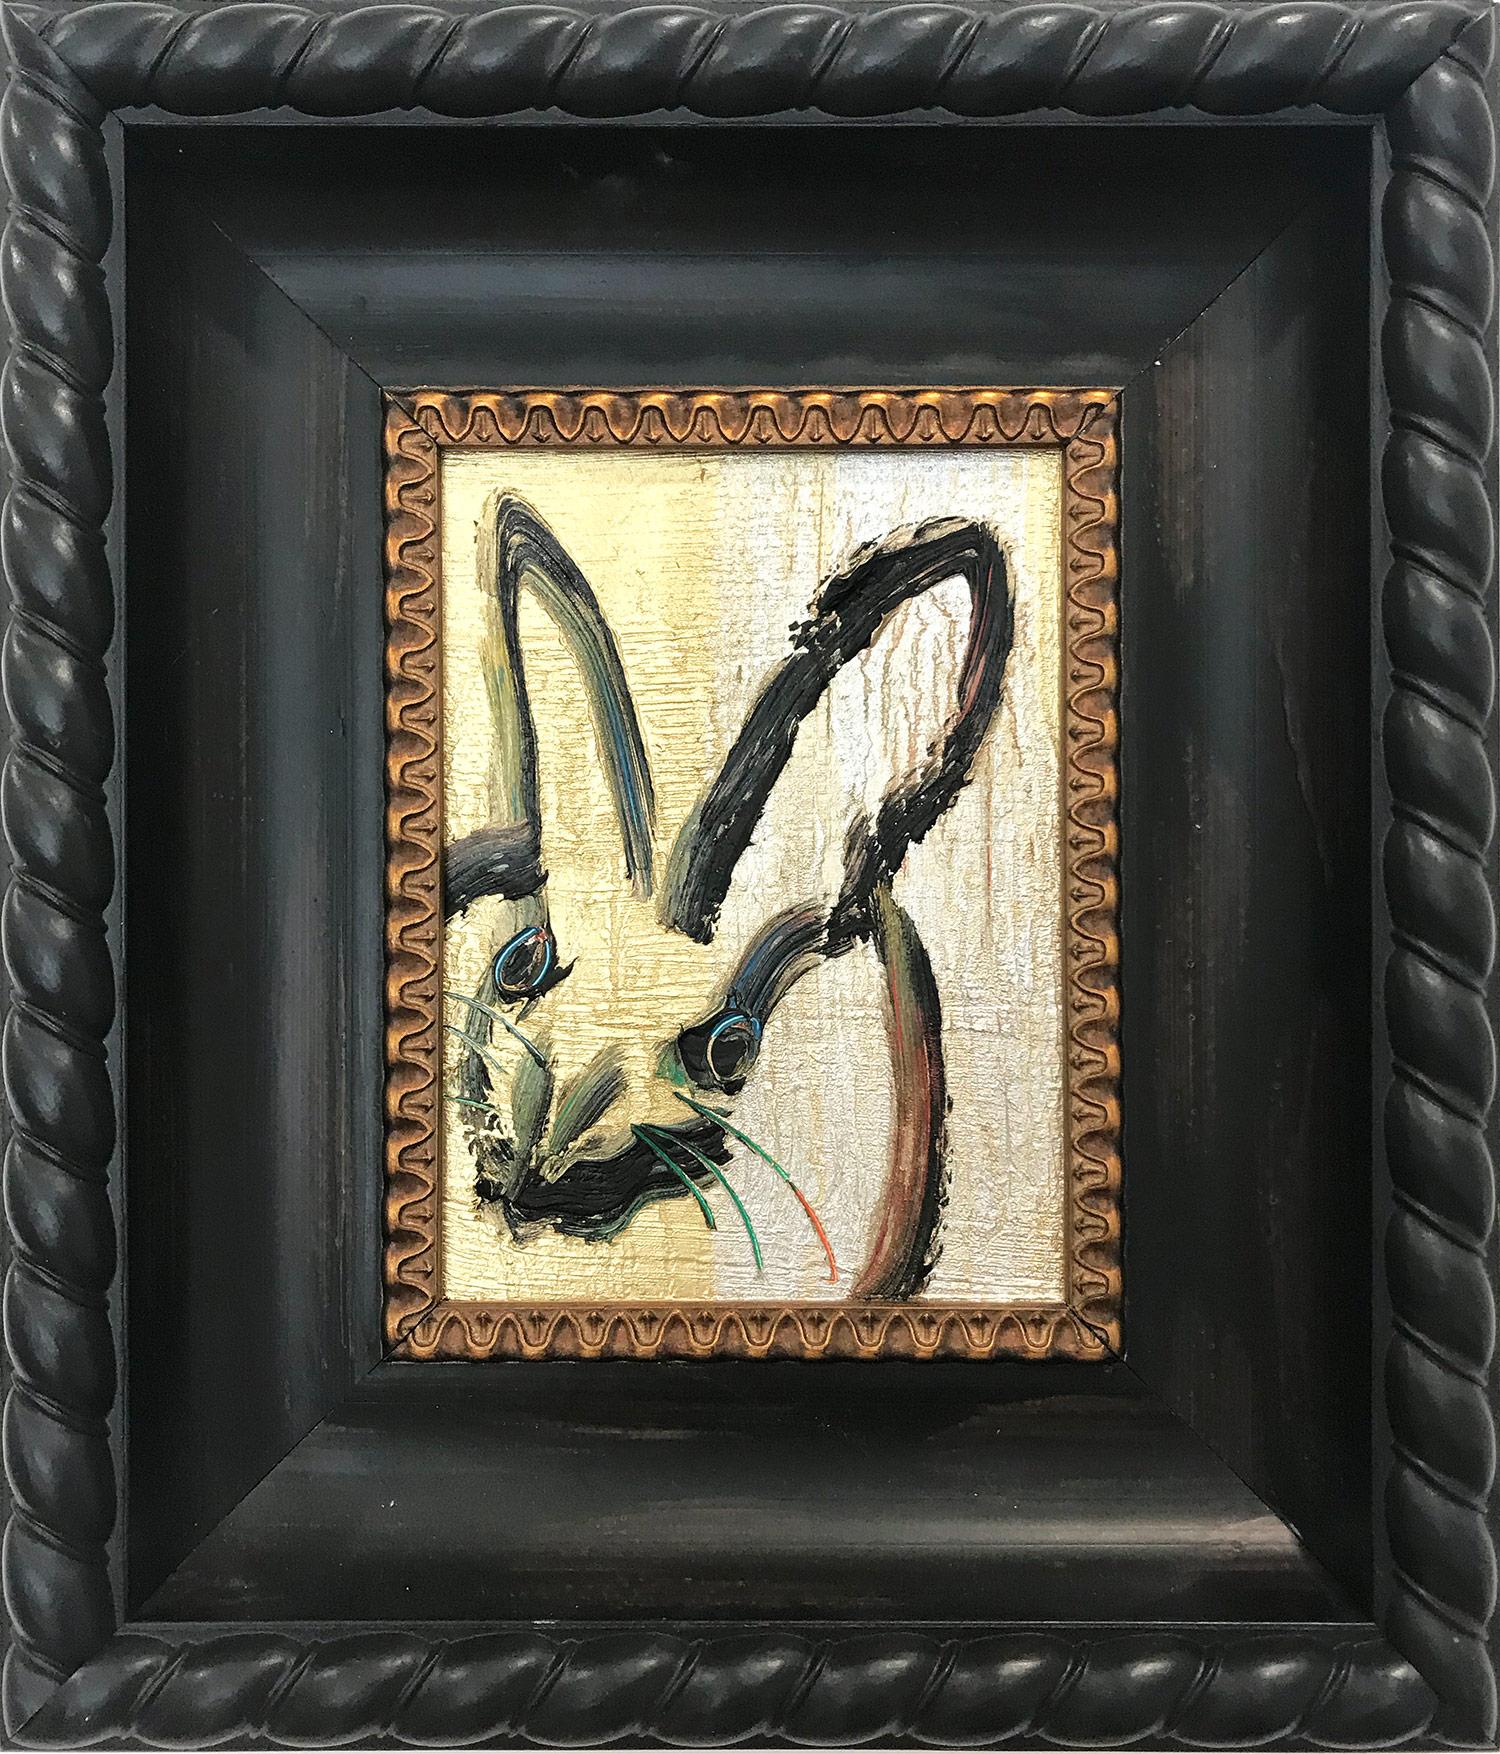 Hunt Slonem Abstract Painting - "Golden Girl" (Black Bunny on Gold with Green, Red, Blue Accents)